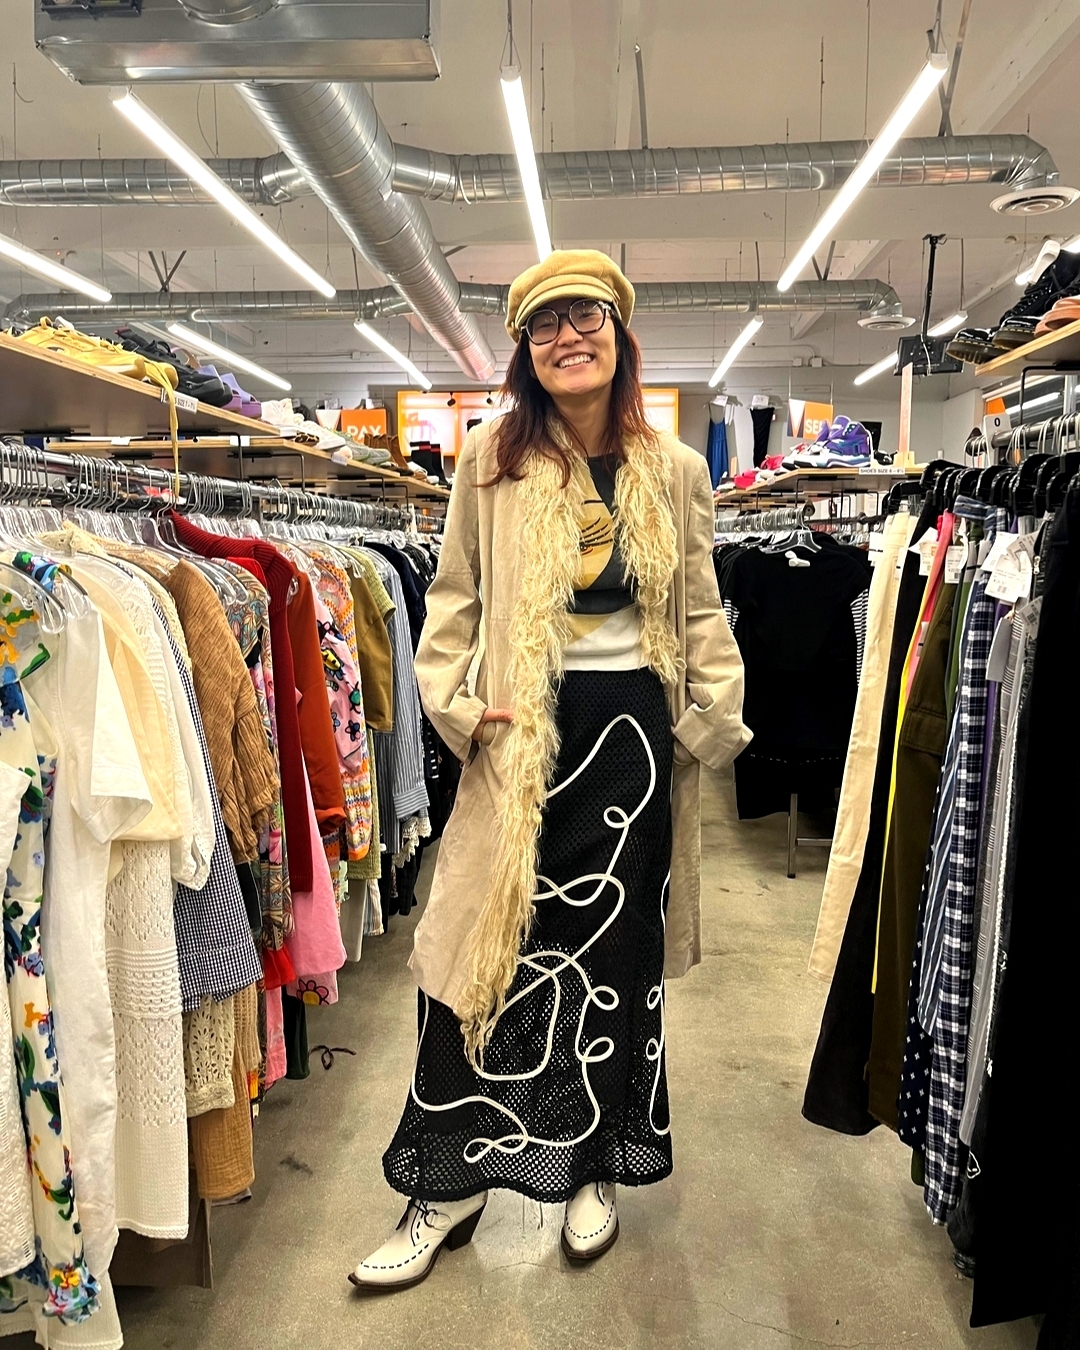 Spotlight on Staff Style. 🧡 SWIPE 👉 ⁣Crossroads has the best-dressed employees! Want to join the team? Click the Careers link in our bio!​​​​​​​​​⁣⁣⁣⁣⁣⁣

#crossroadstrading #crossroadsfinds #crossroadsstore #fashionfinds #buyselltrade #style #thriftfinds #consignment #shopping #womensfashion #mensfashion #fashionblogger #ootd #fashion